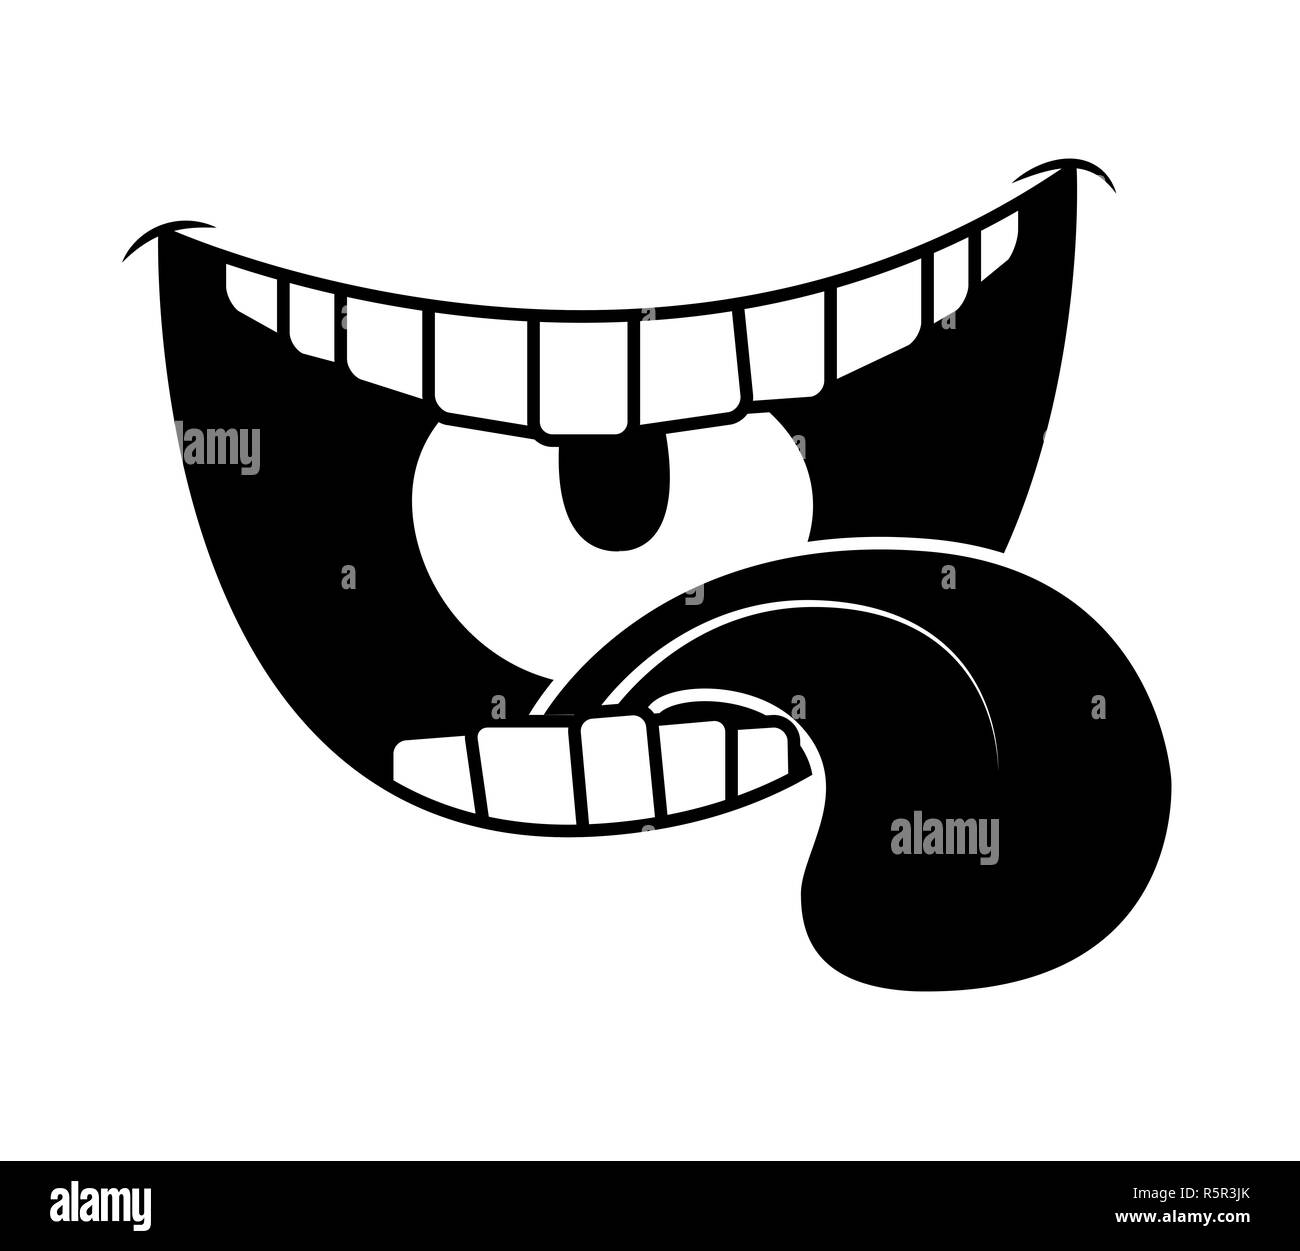 Cartoon smile, mouth, lips with teeth and tongue. silhouette vector illustration isolated on white background Stock Photo